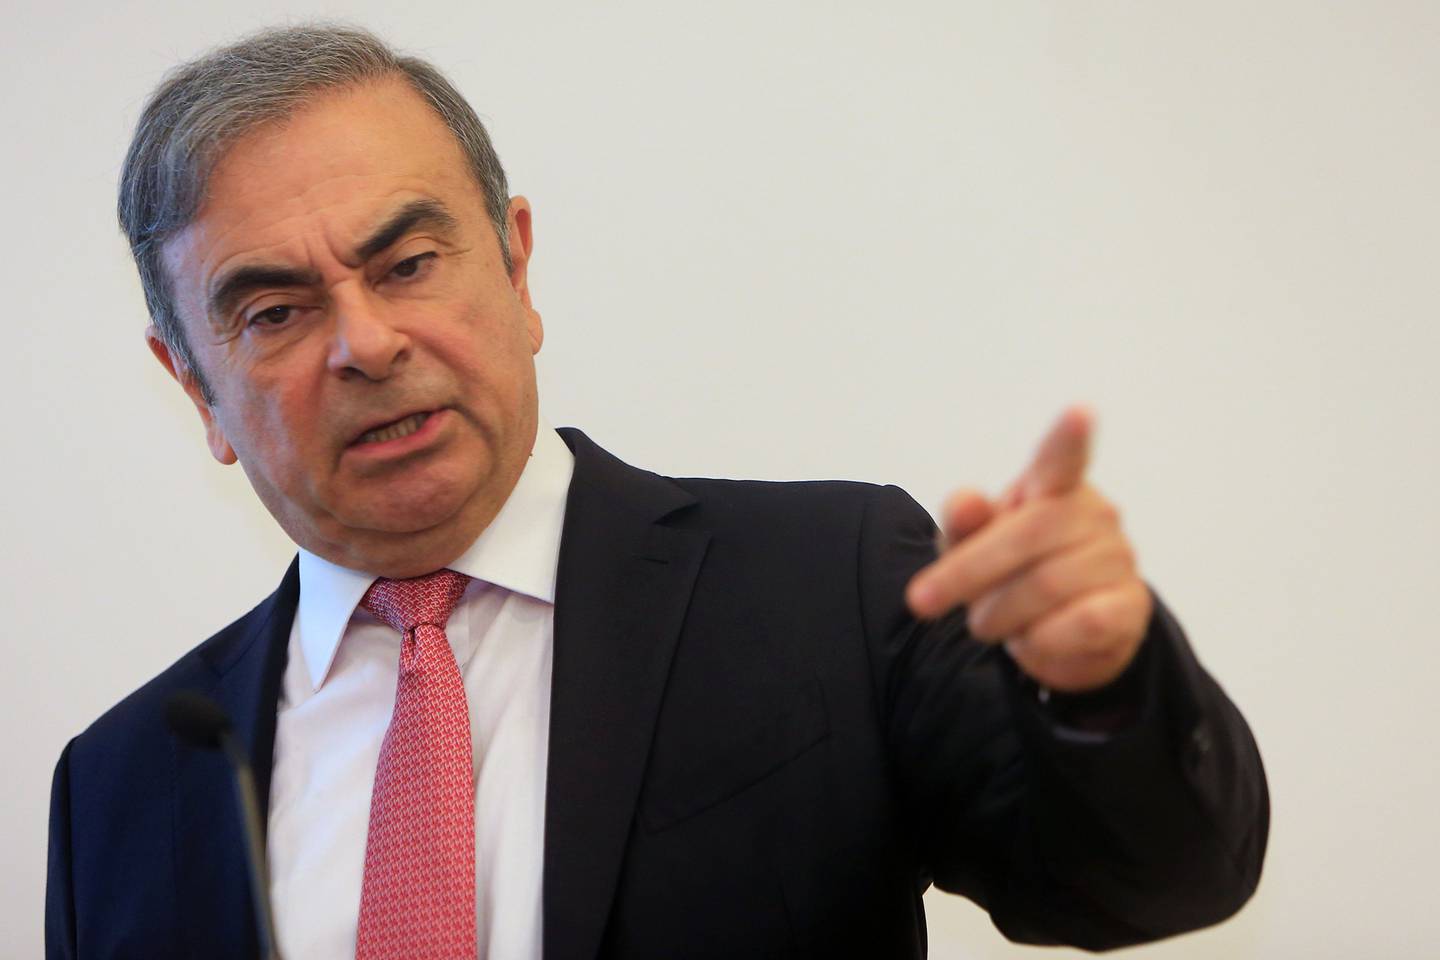 Former Renault-Nissan boss Carlos Ghosn addresses a large crowd of journalists on his reasons for dodging trial in Japan, where he is accused of financial misconduct, at the Lebanese Press Syndicate in Beirut on January 8, 2020.